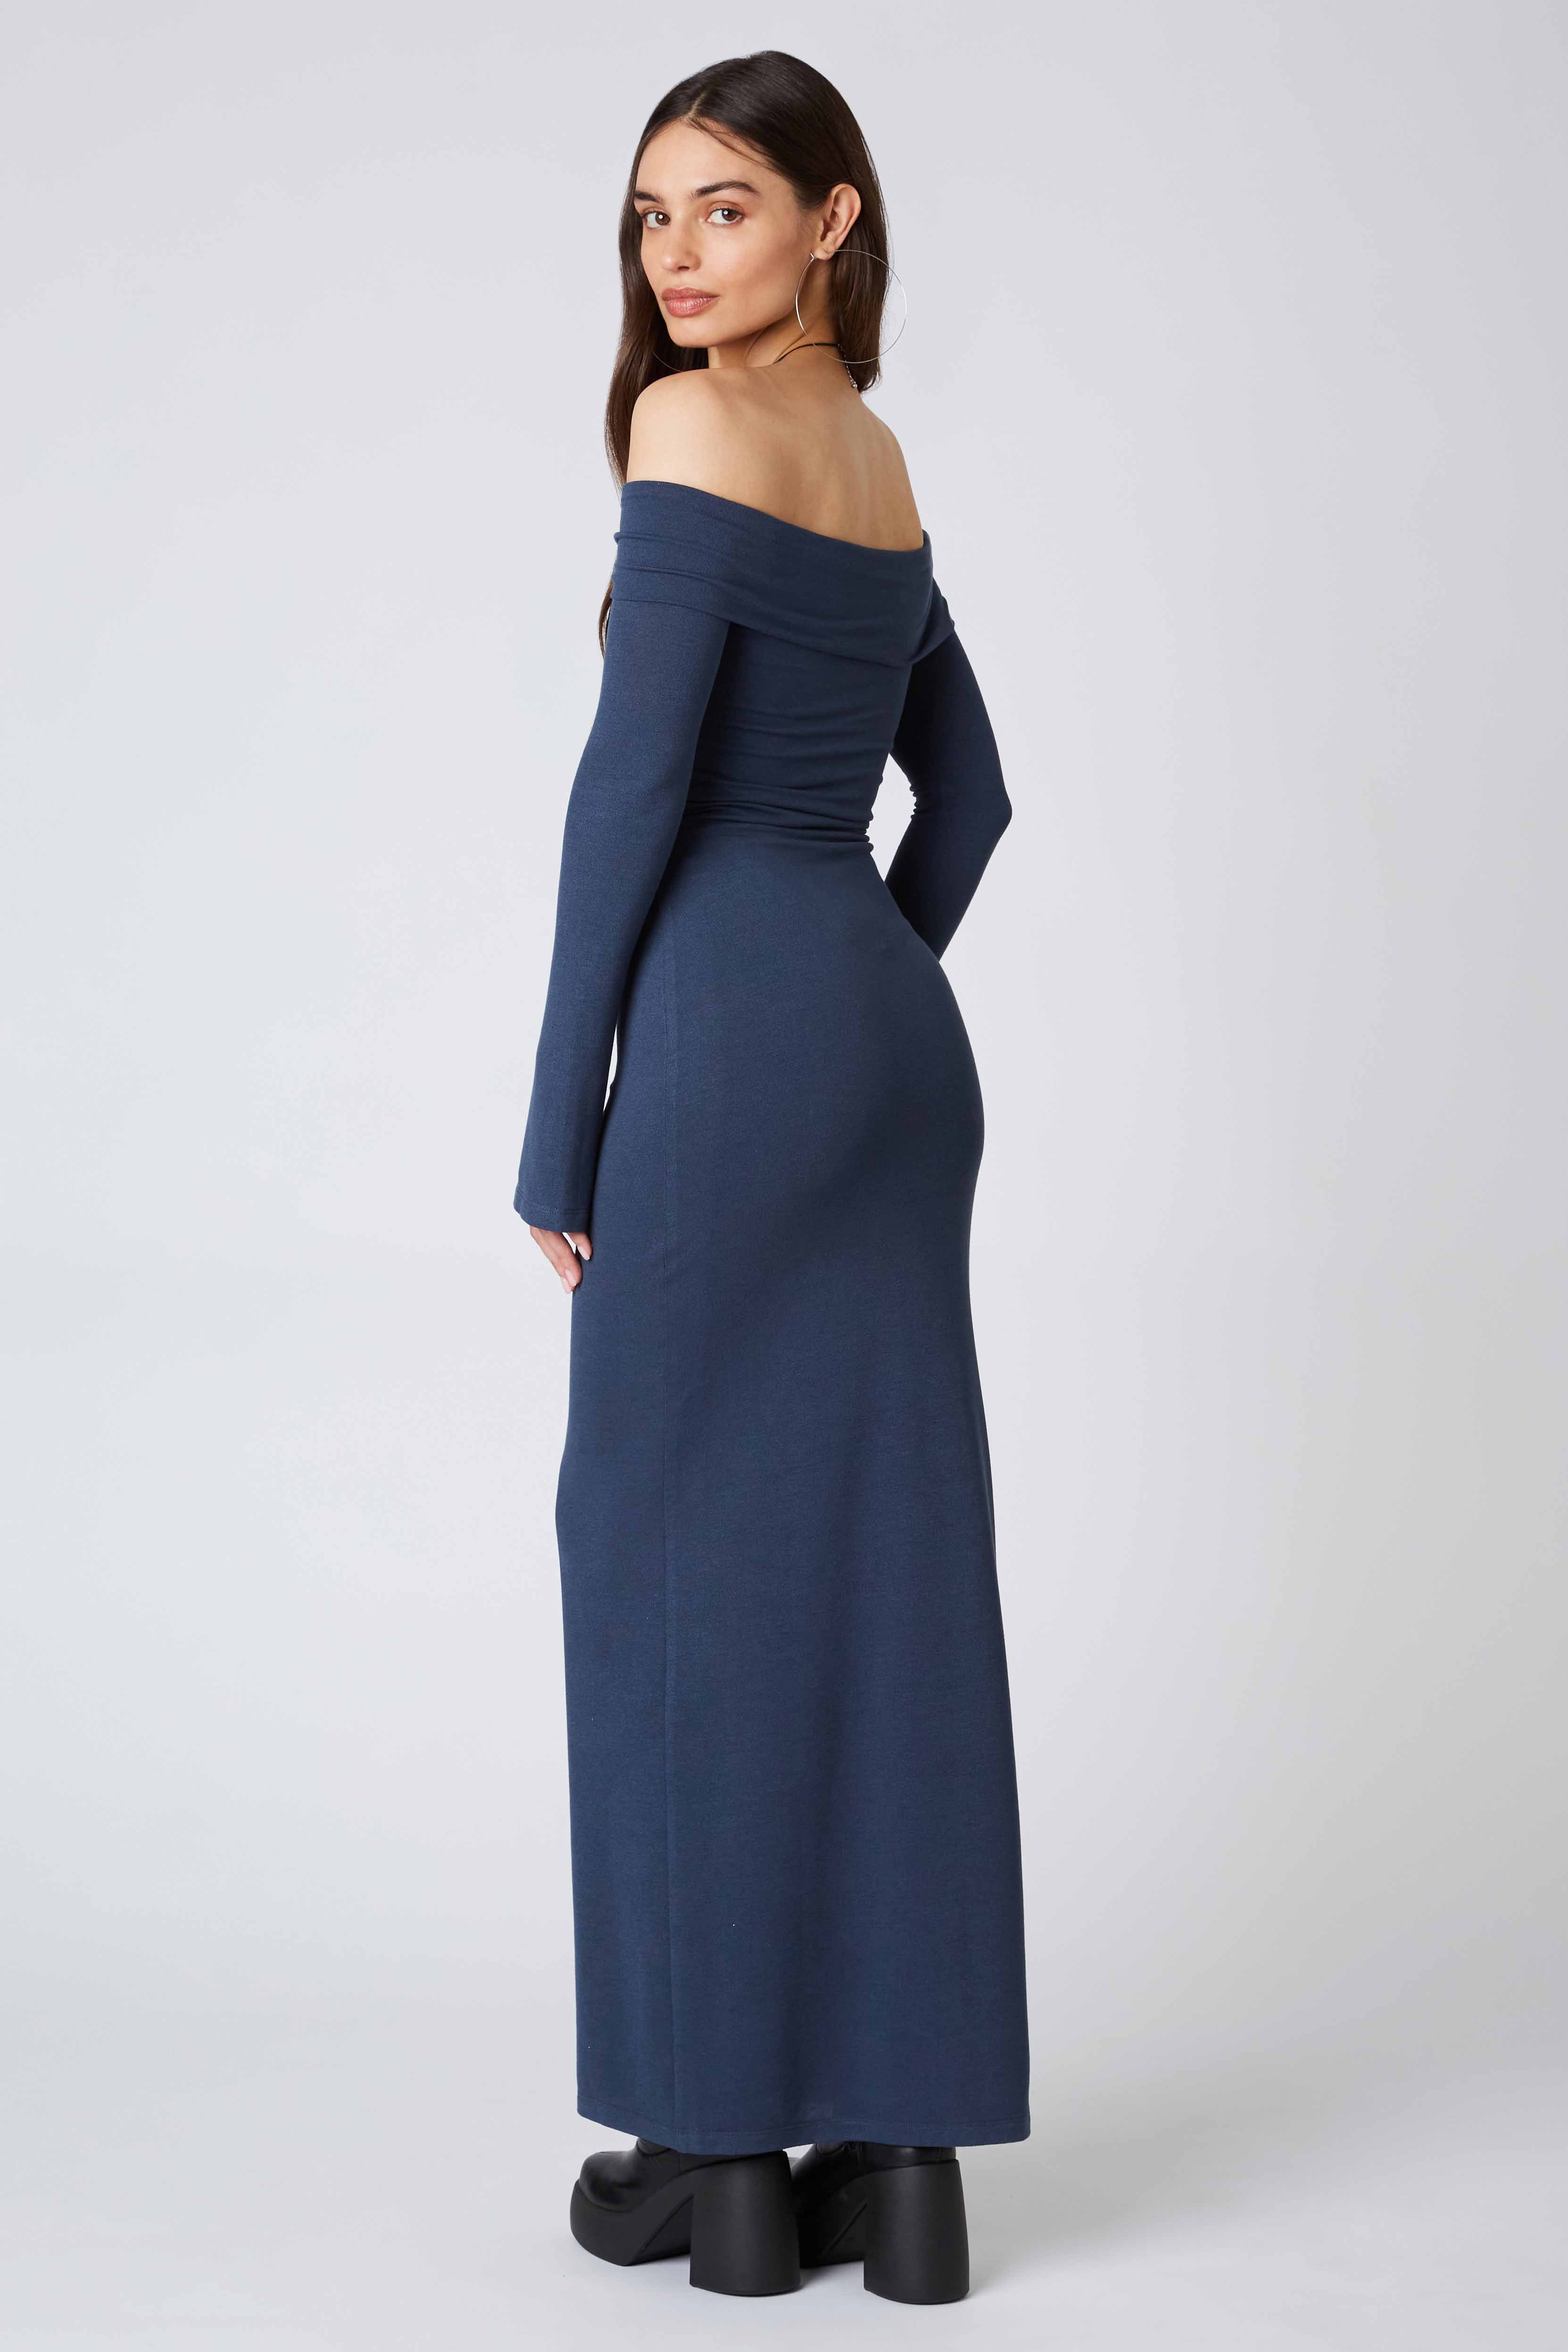 Long Sleeve Off the Shoulder Maxi Dress in Pewter Back View